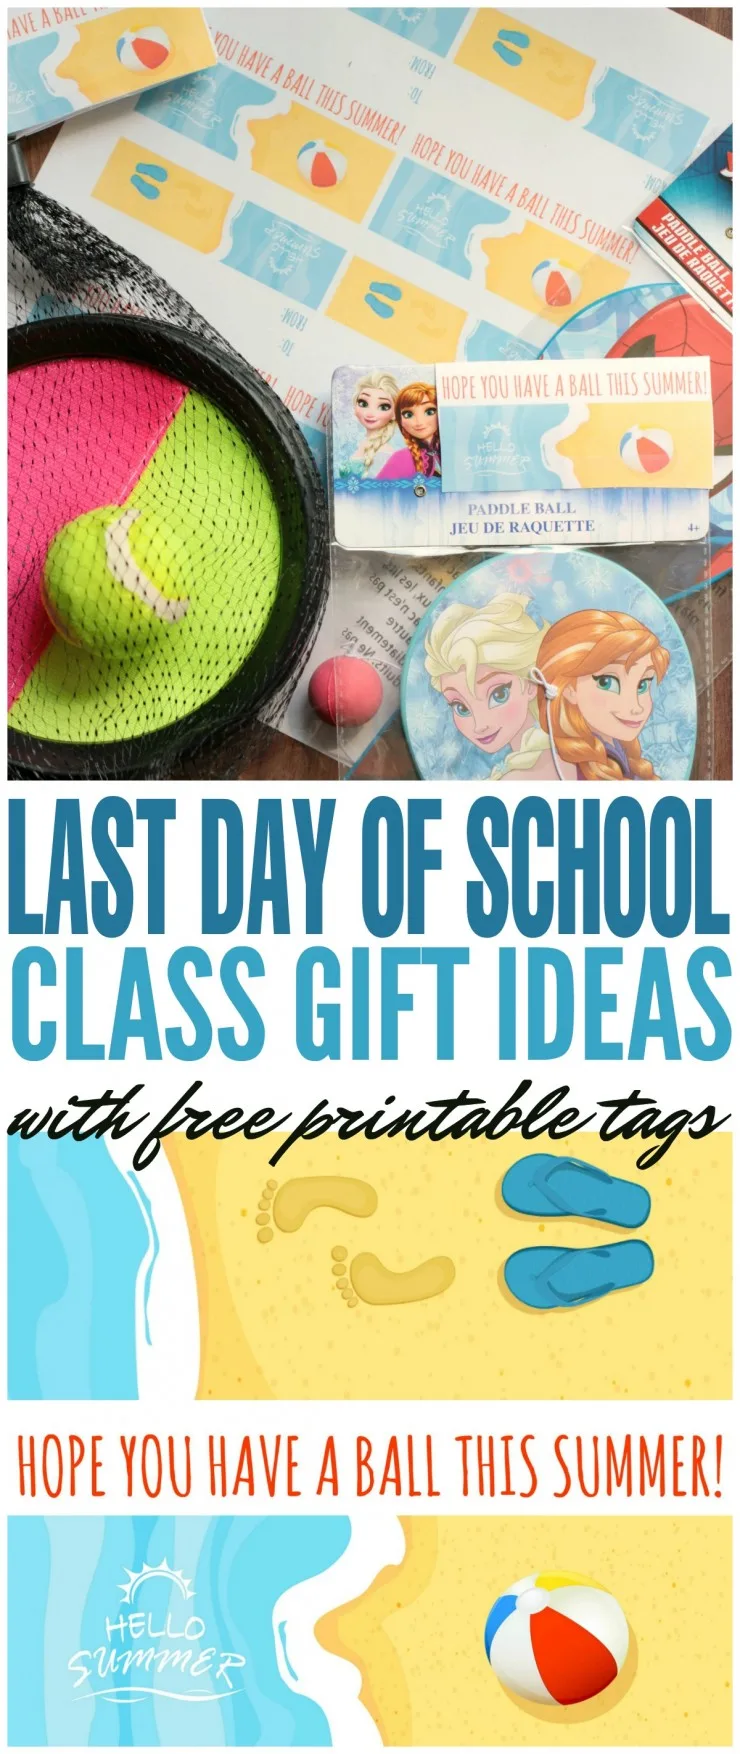 Have your child wish their friends to have a ball this summer with these fun and free printable Last Day of School Class Gift tags plus gift ideas!